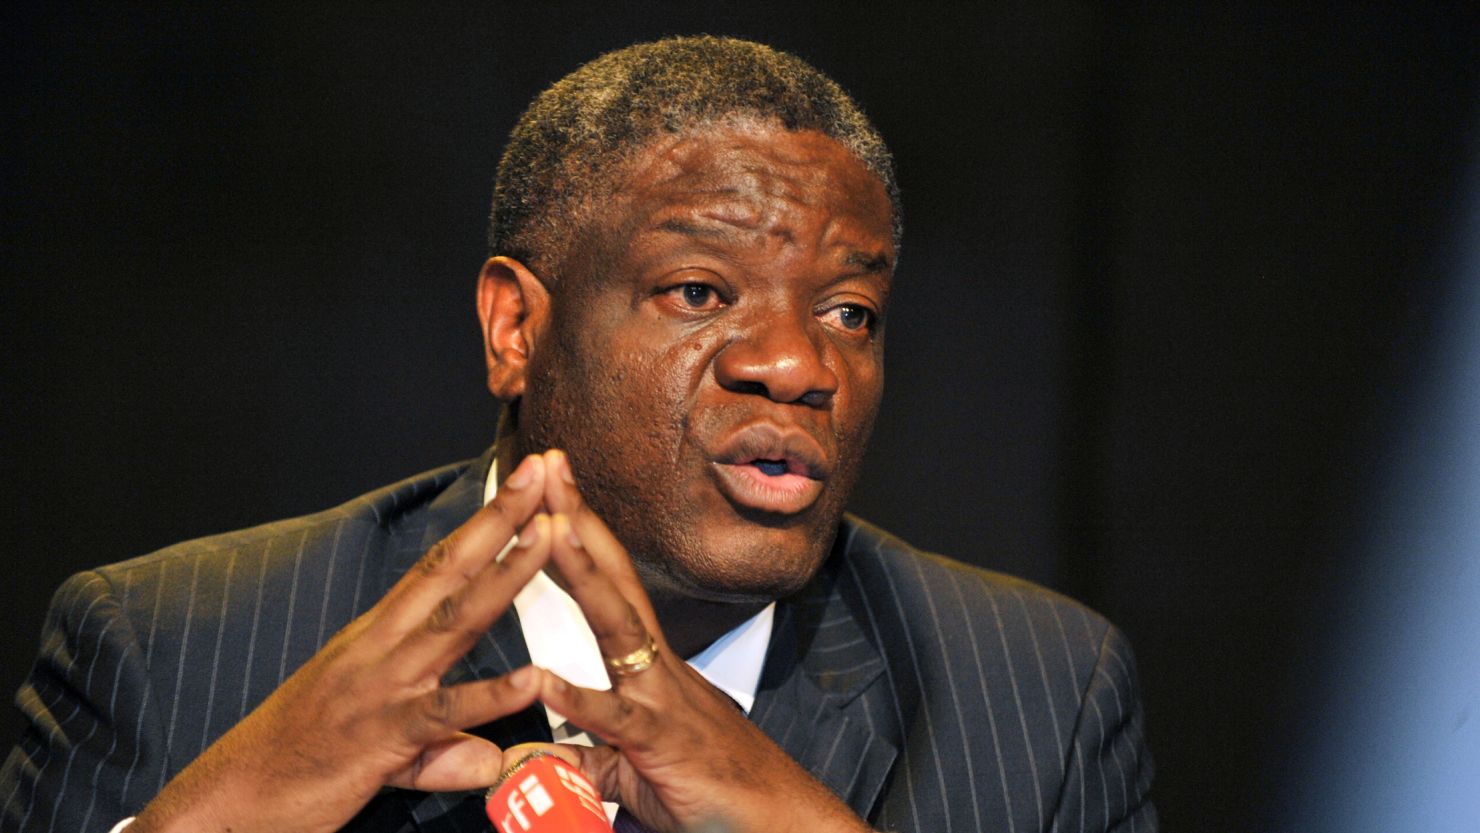 Denis Mukwege, who founded a hospital for rape victims, gives a news conference on March 12, 2013, in Kinshasa, Congo.